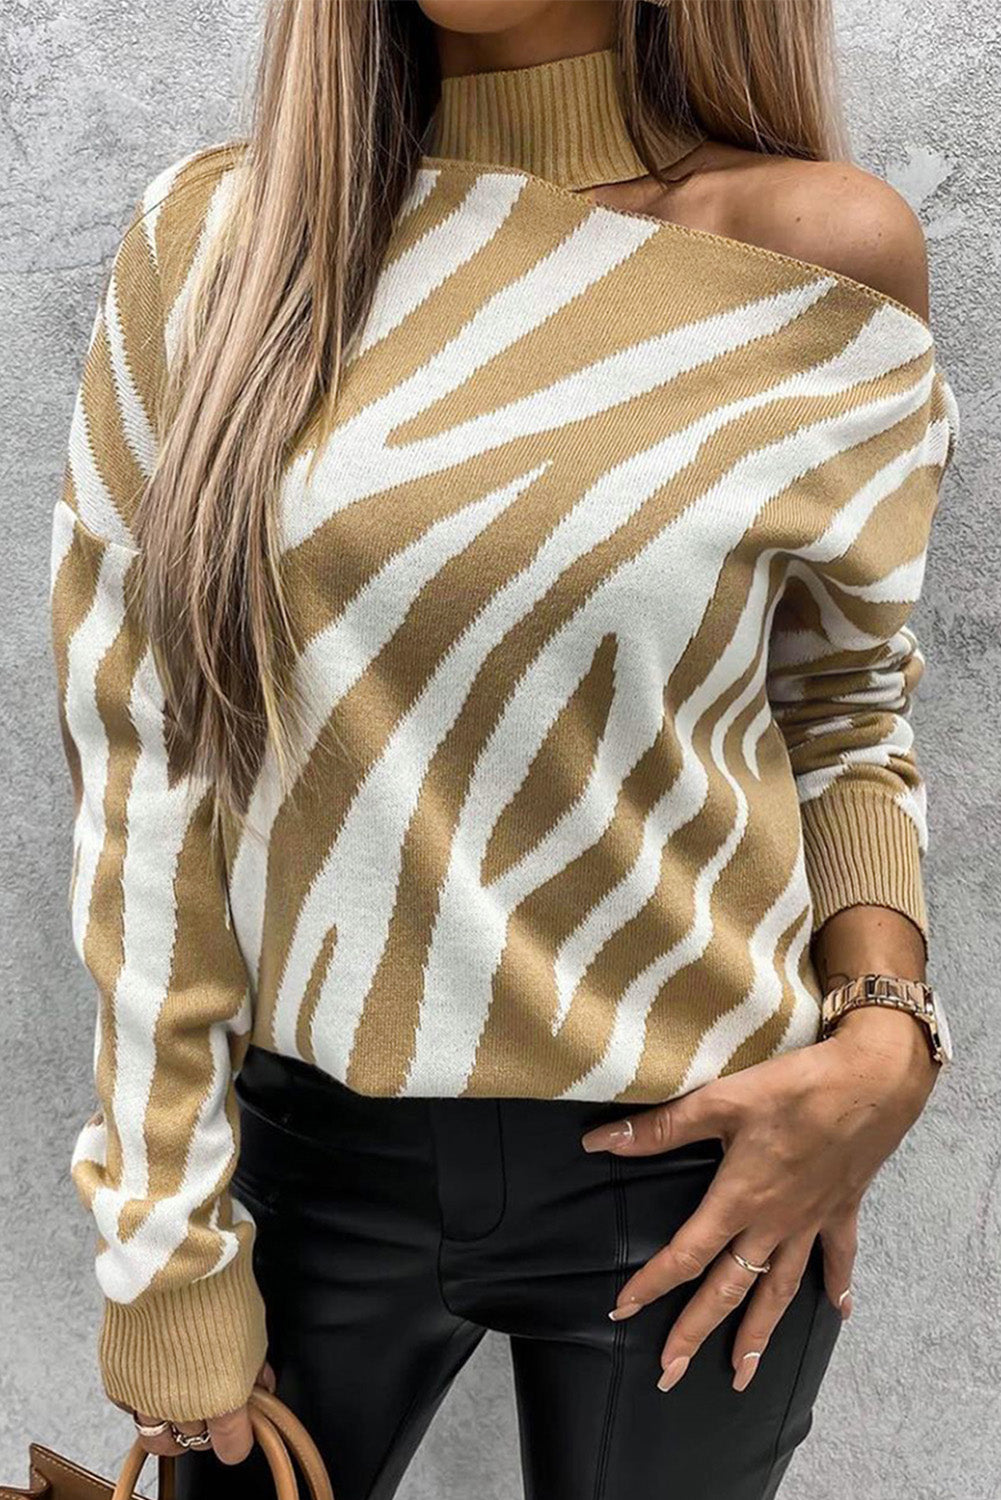 A khaki coloured zebra print sweater with a mock neck and cold shoulder.